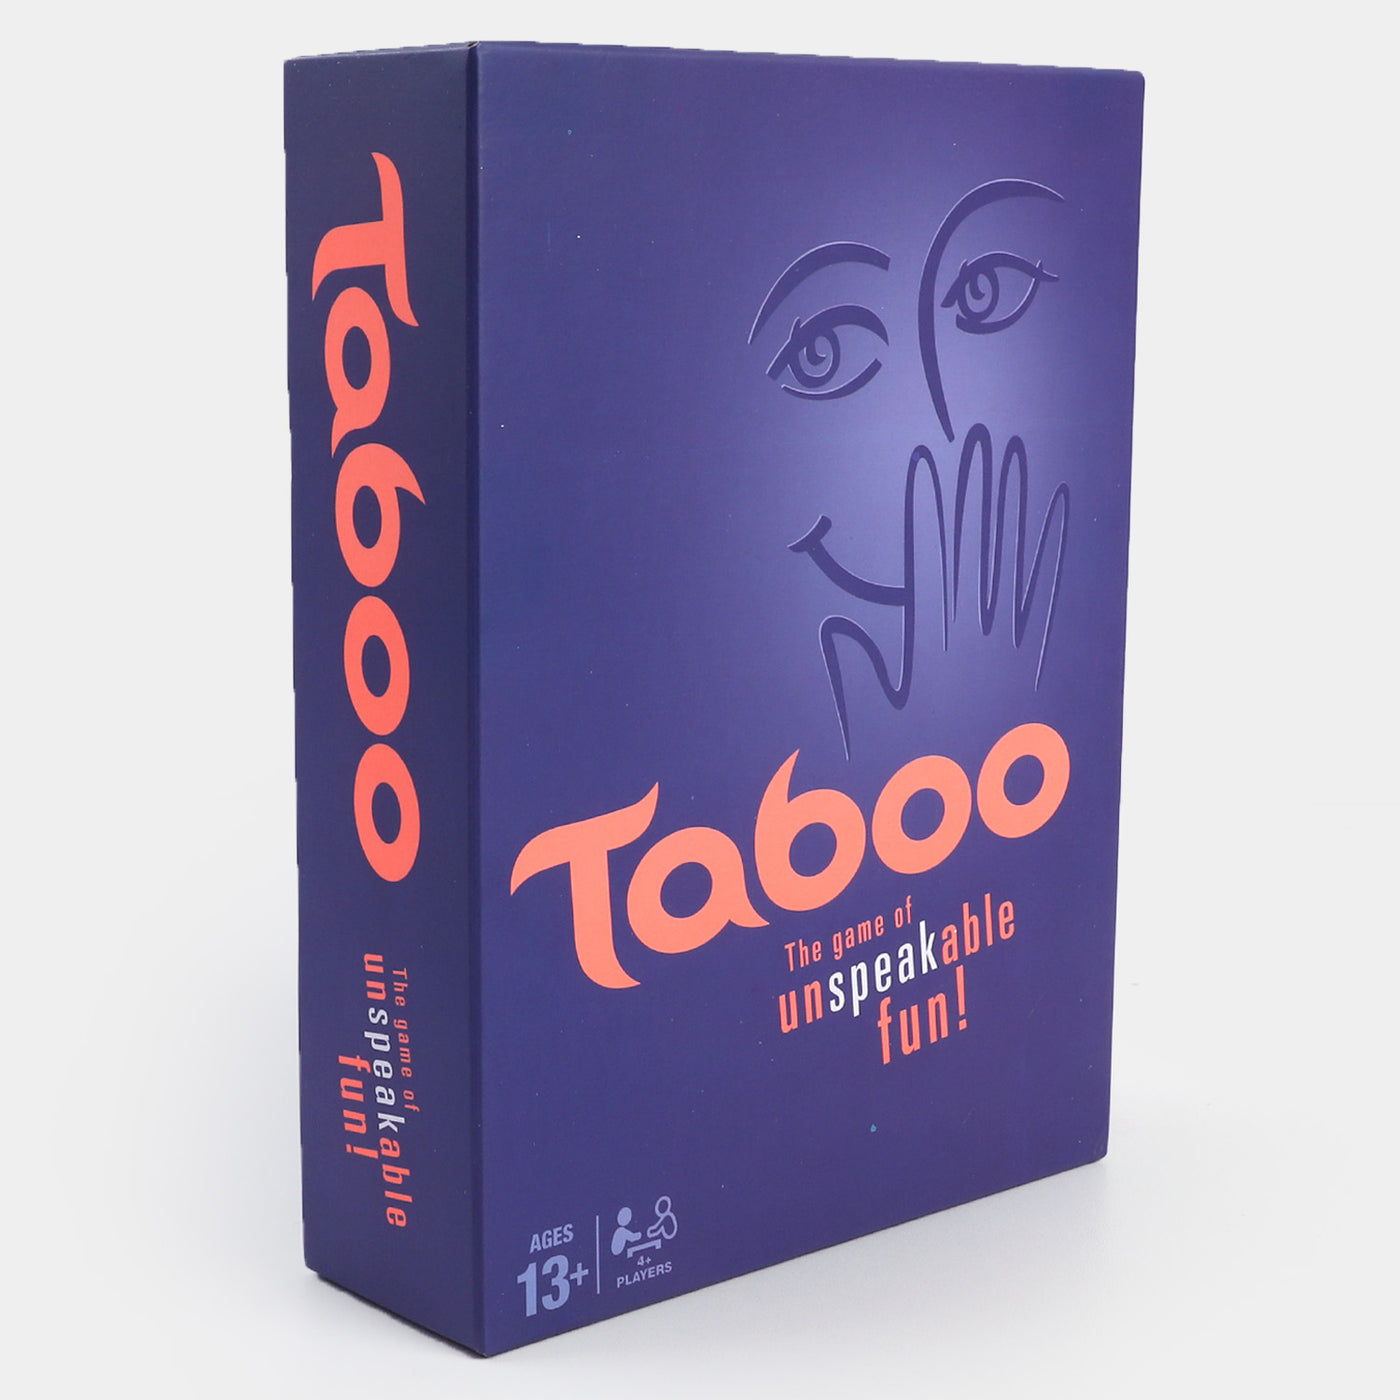 The Game of Unspeakable Fun-Taboo